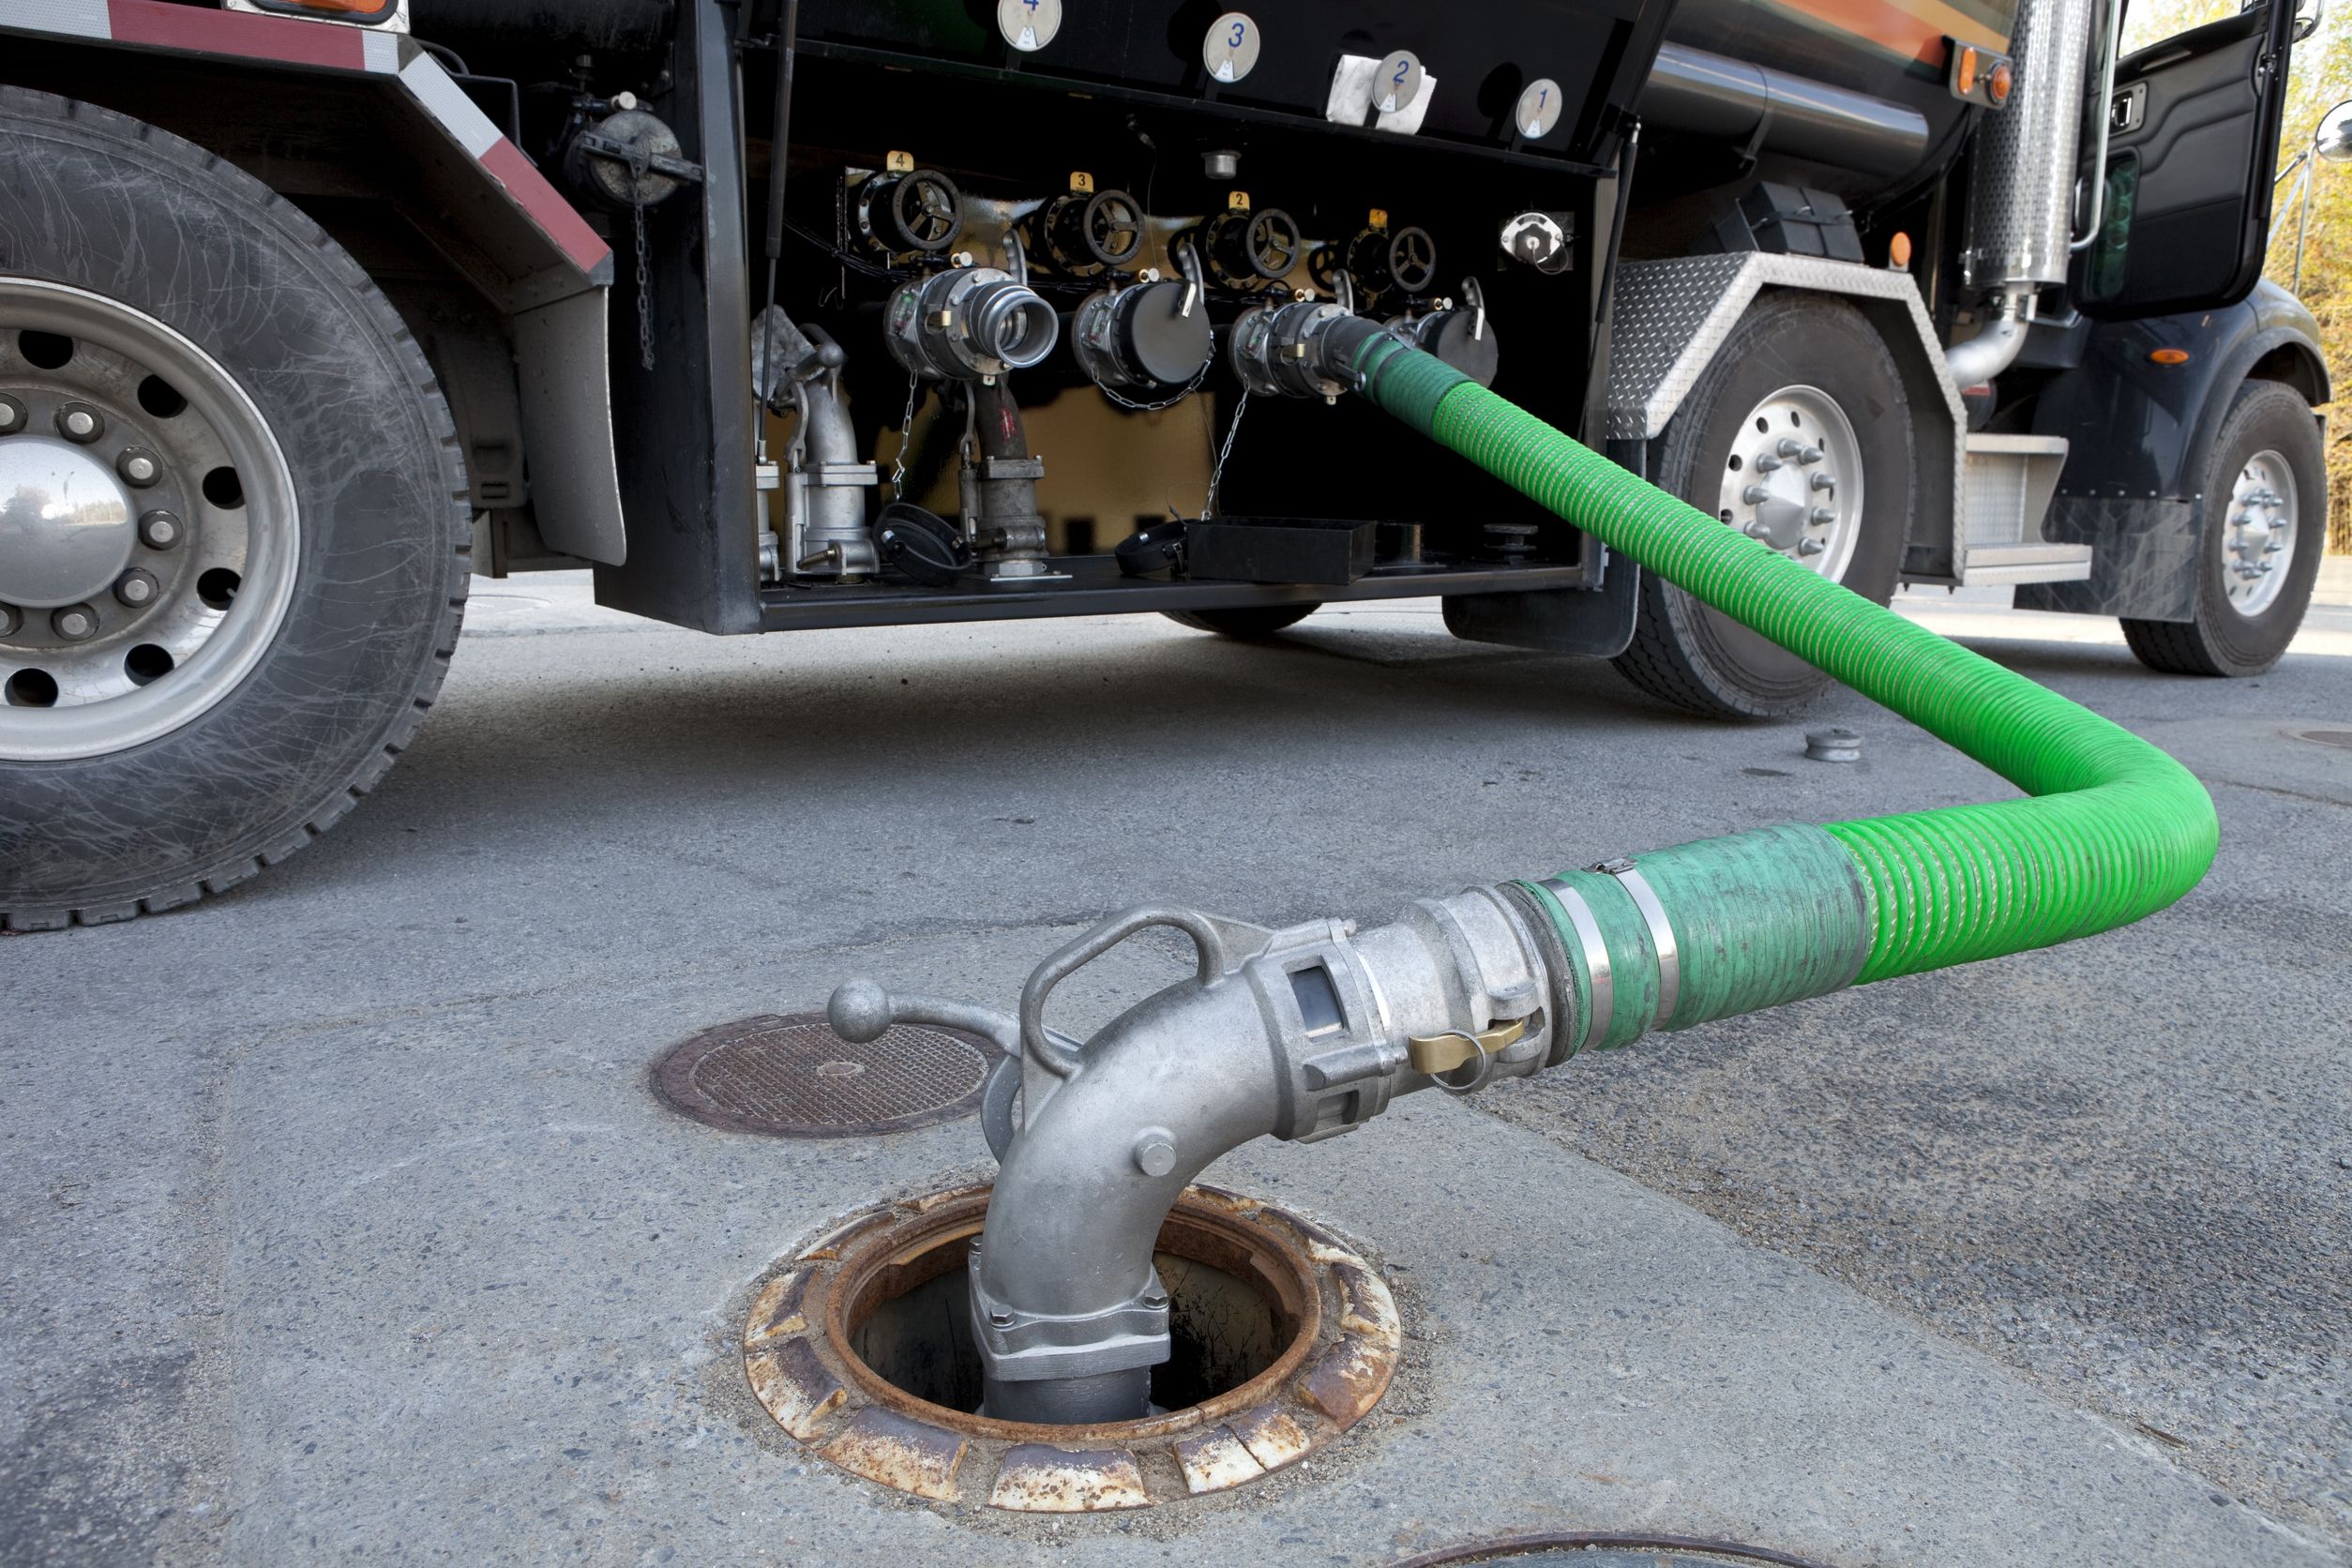 It’s Time to Get Help with Sewer Drain Cleaning in Bensonhurst, NY